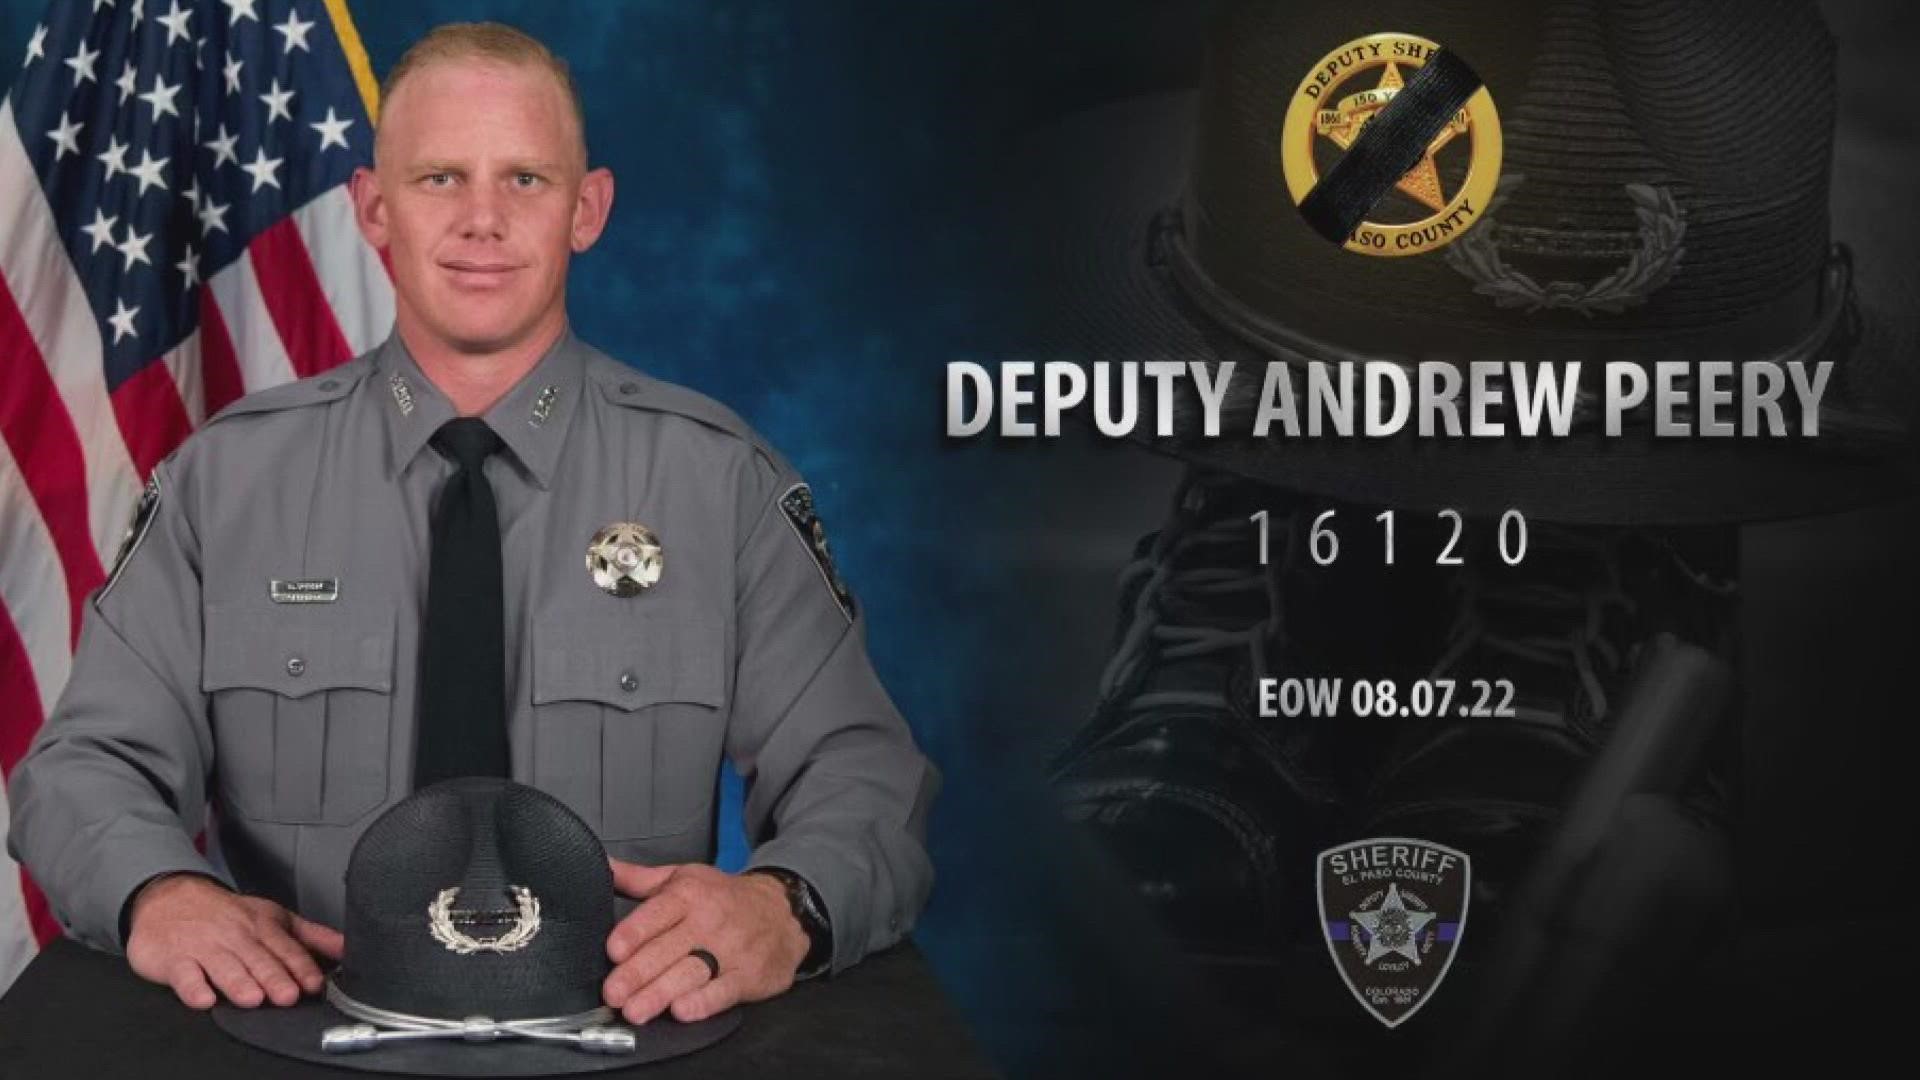 Deputy Andrew Peery was killed in the shooting south of Colorado Springs. The sheriff's office is searching for a suspect.